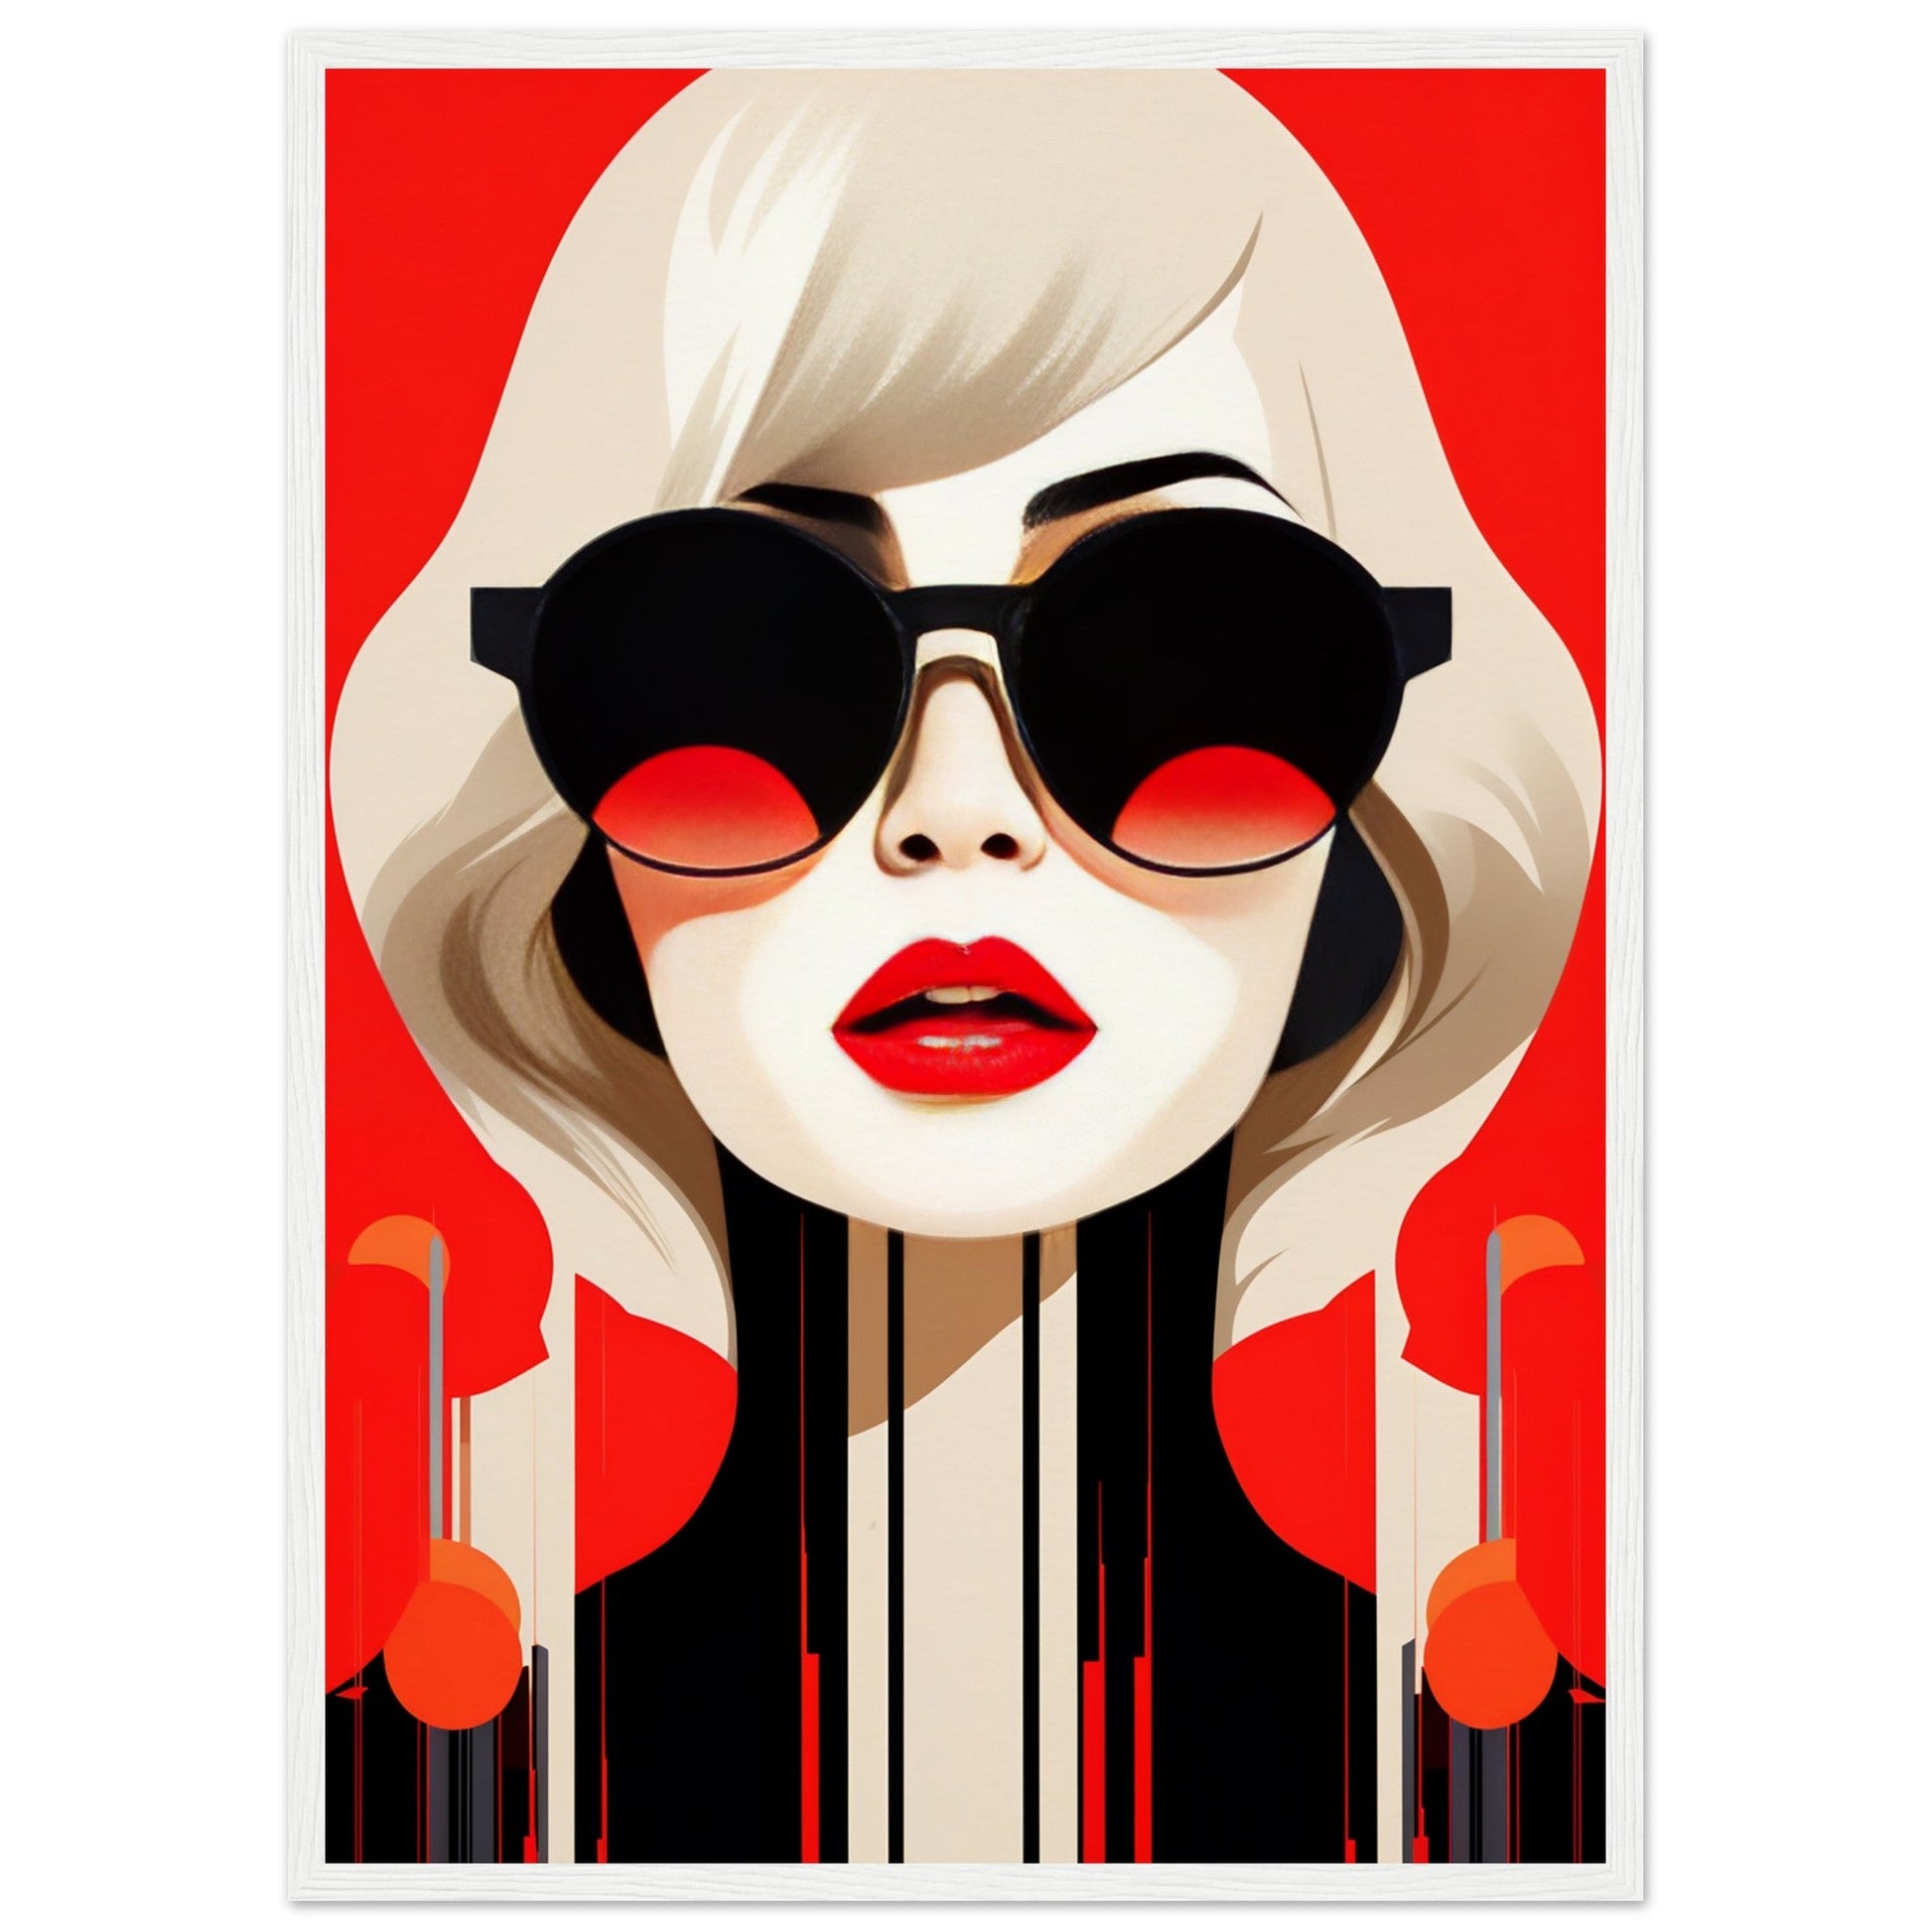 A Hey Honey The Oracle Windows™ Collection of a woman with sunglasses on a red background, perfect for my wall as fashion wall art.